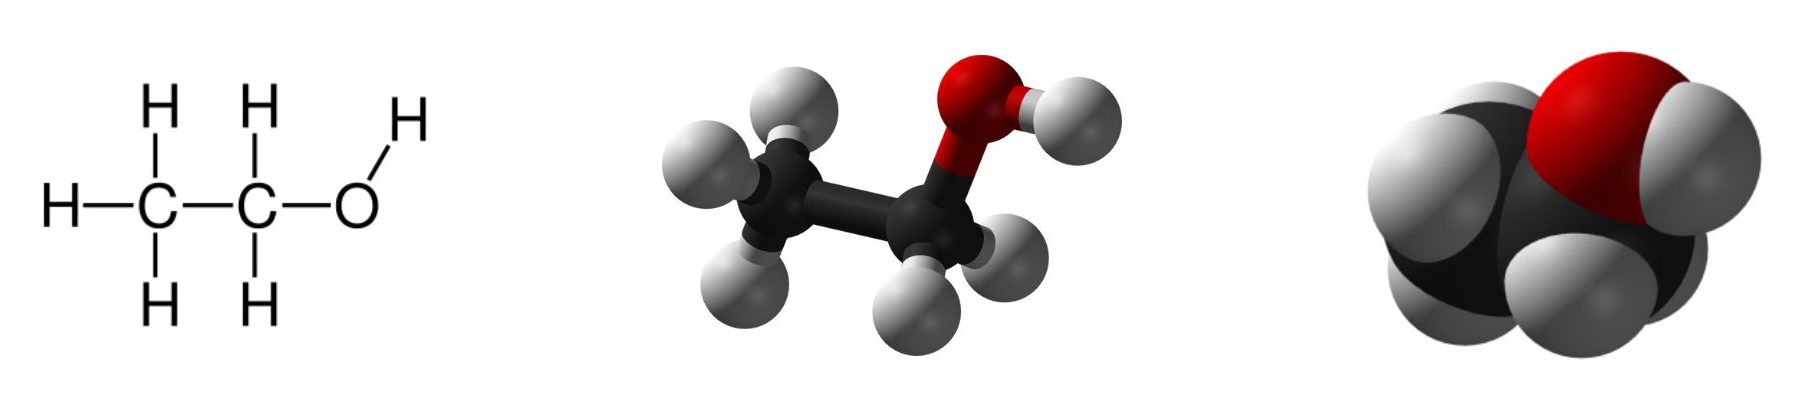 Structure of ethanol from left to right a) structural formula, b) ball and stick model, c) space-filling model.